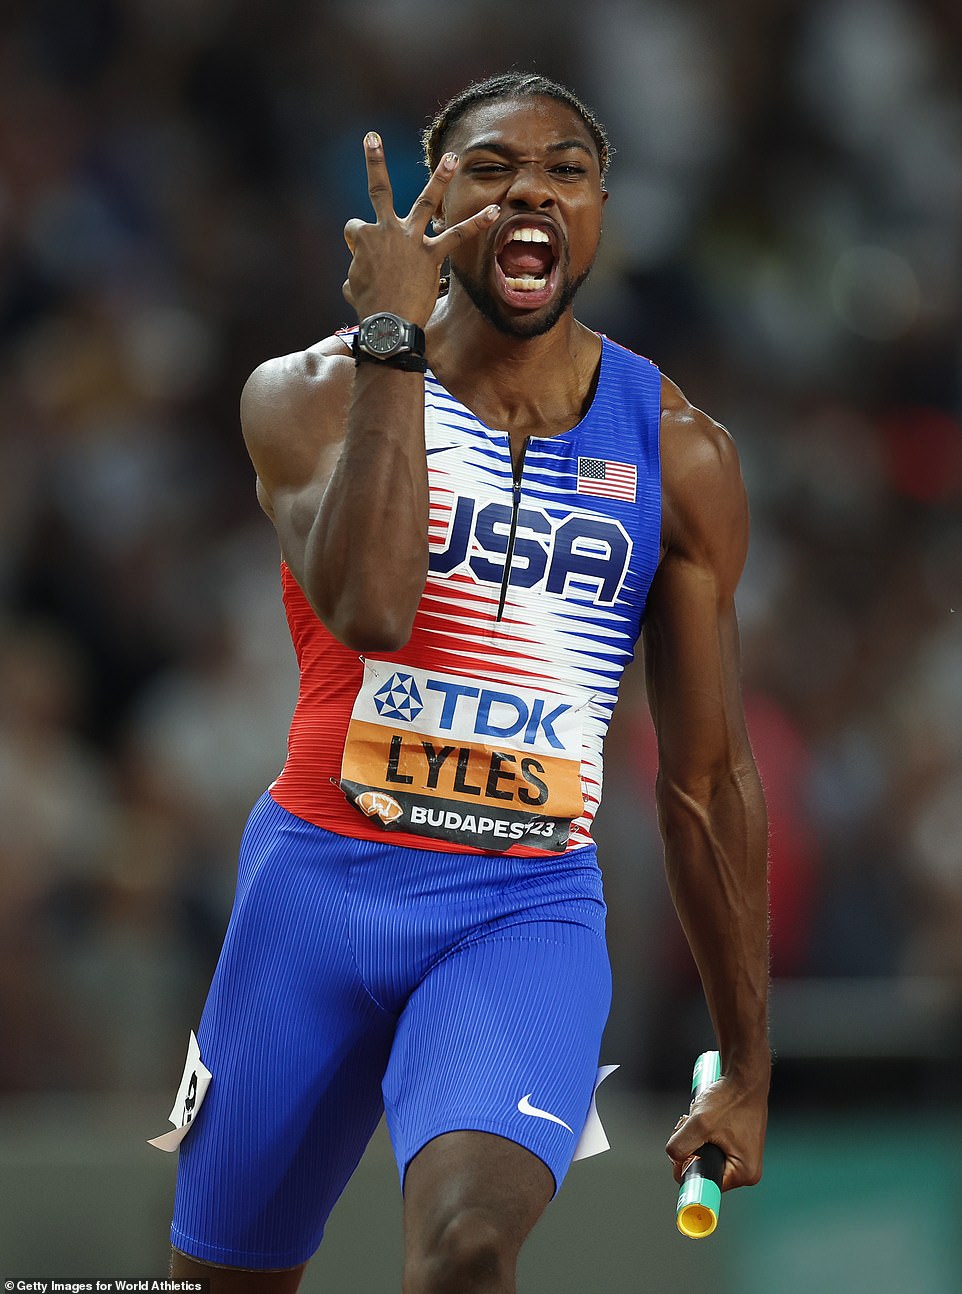 Noah Lyles of Team United States celebrates after winning the Men's 4x100m Relay Final in Budapest back in August